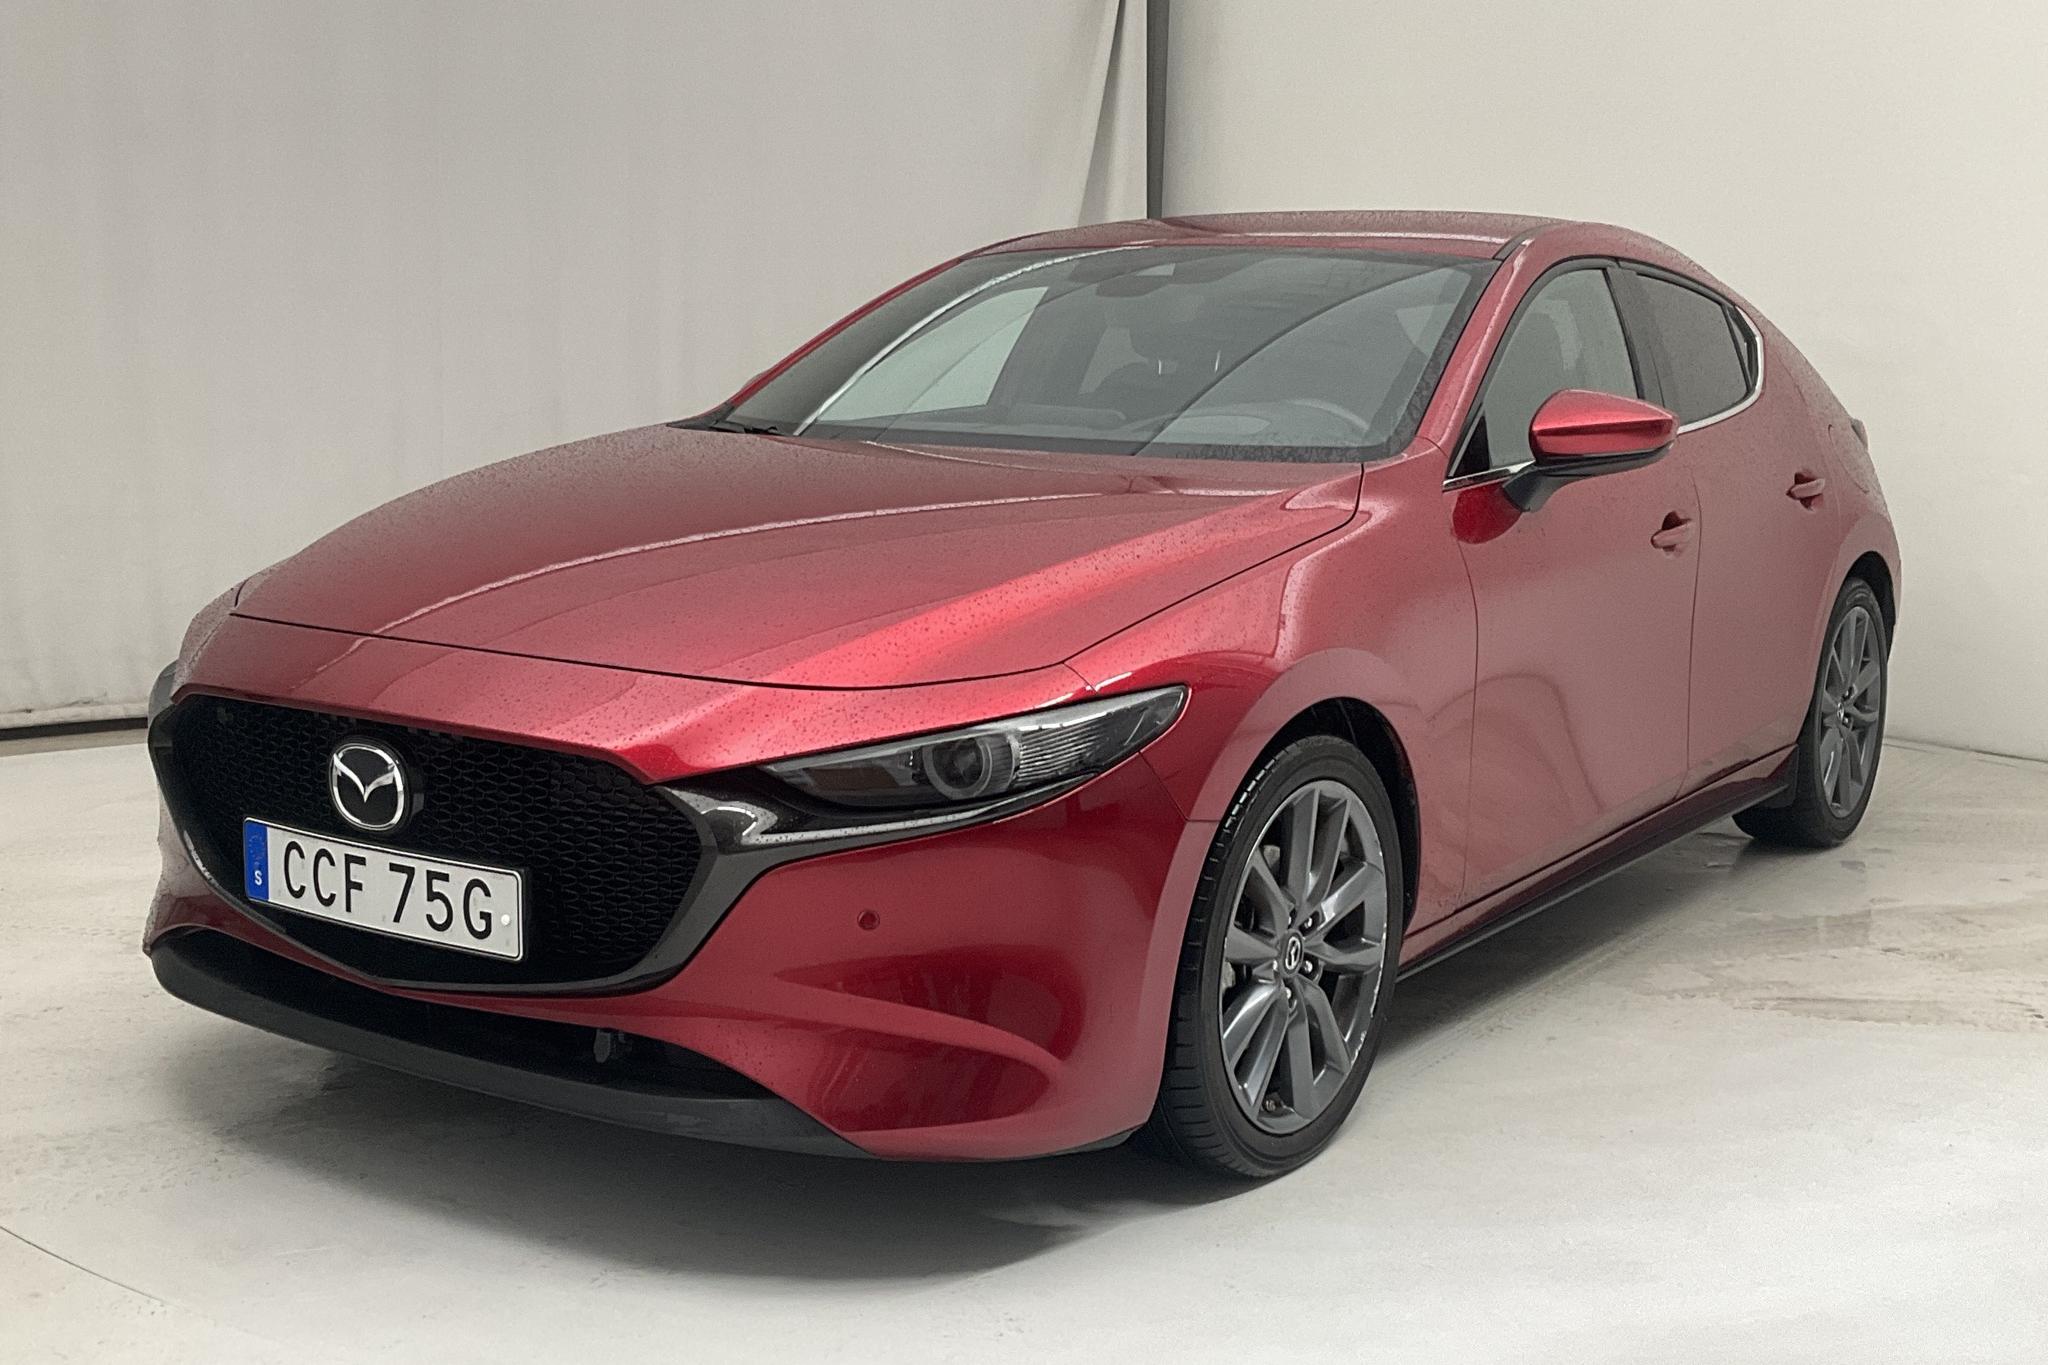 Mazda 3 2.0 5dr (122hk) - 23 580 km - Automatic - red - 2019